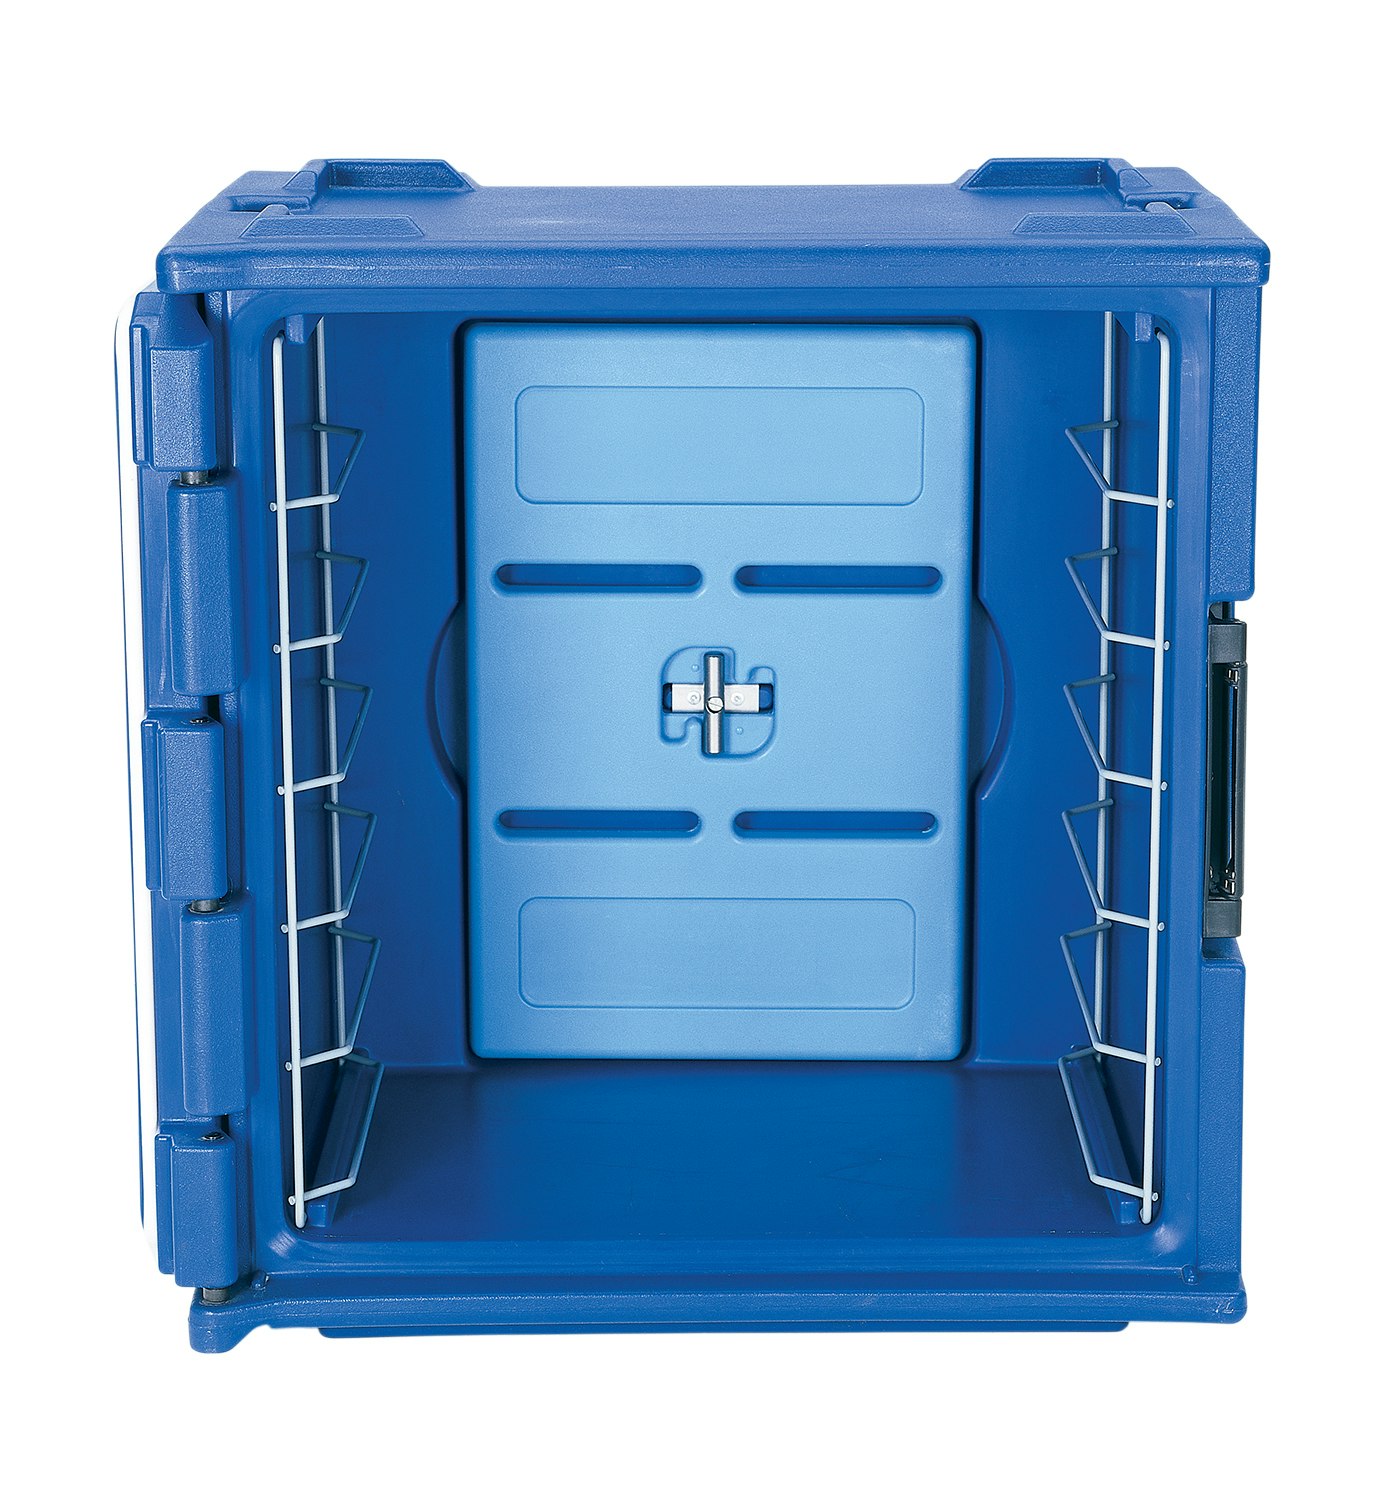 https://cambro-dam.imgix.net/PU0DO3EZ/as/piv6us-7389s0-3l3ci2/BK60406186_Navy_Blue_6-Rail_Insulated_Bakery_Container_Open_Front.jpg?dl